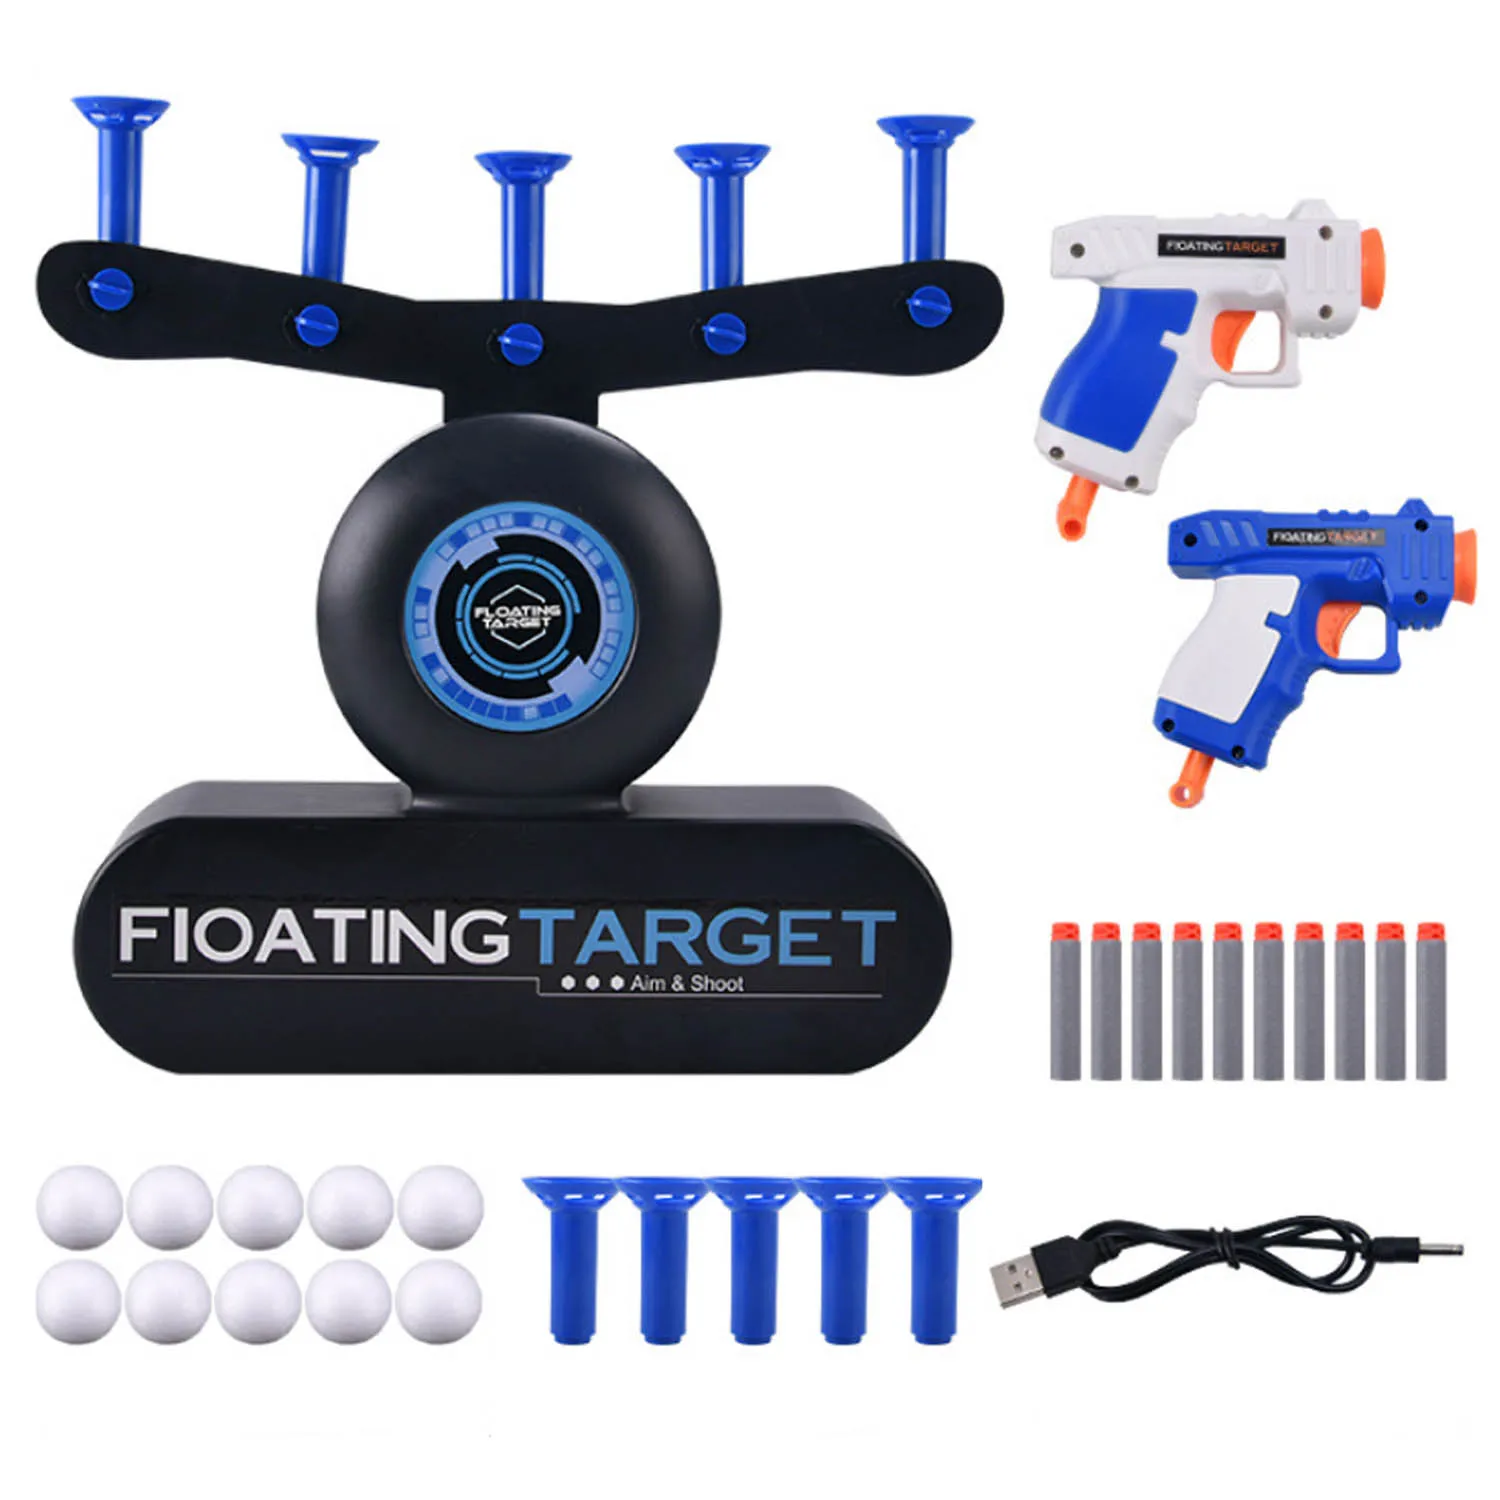 Shooting Electric Floating Target Practice – DnM Toy Box